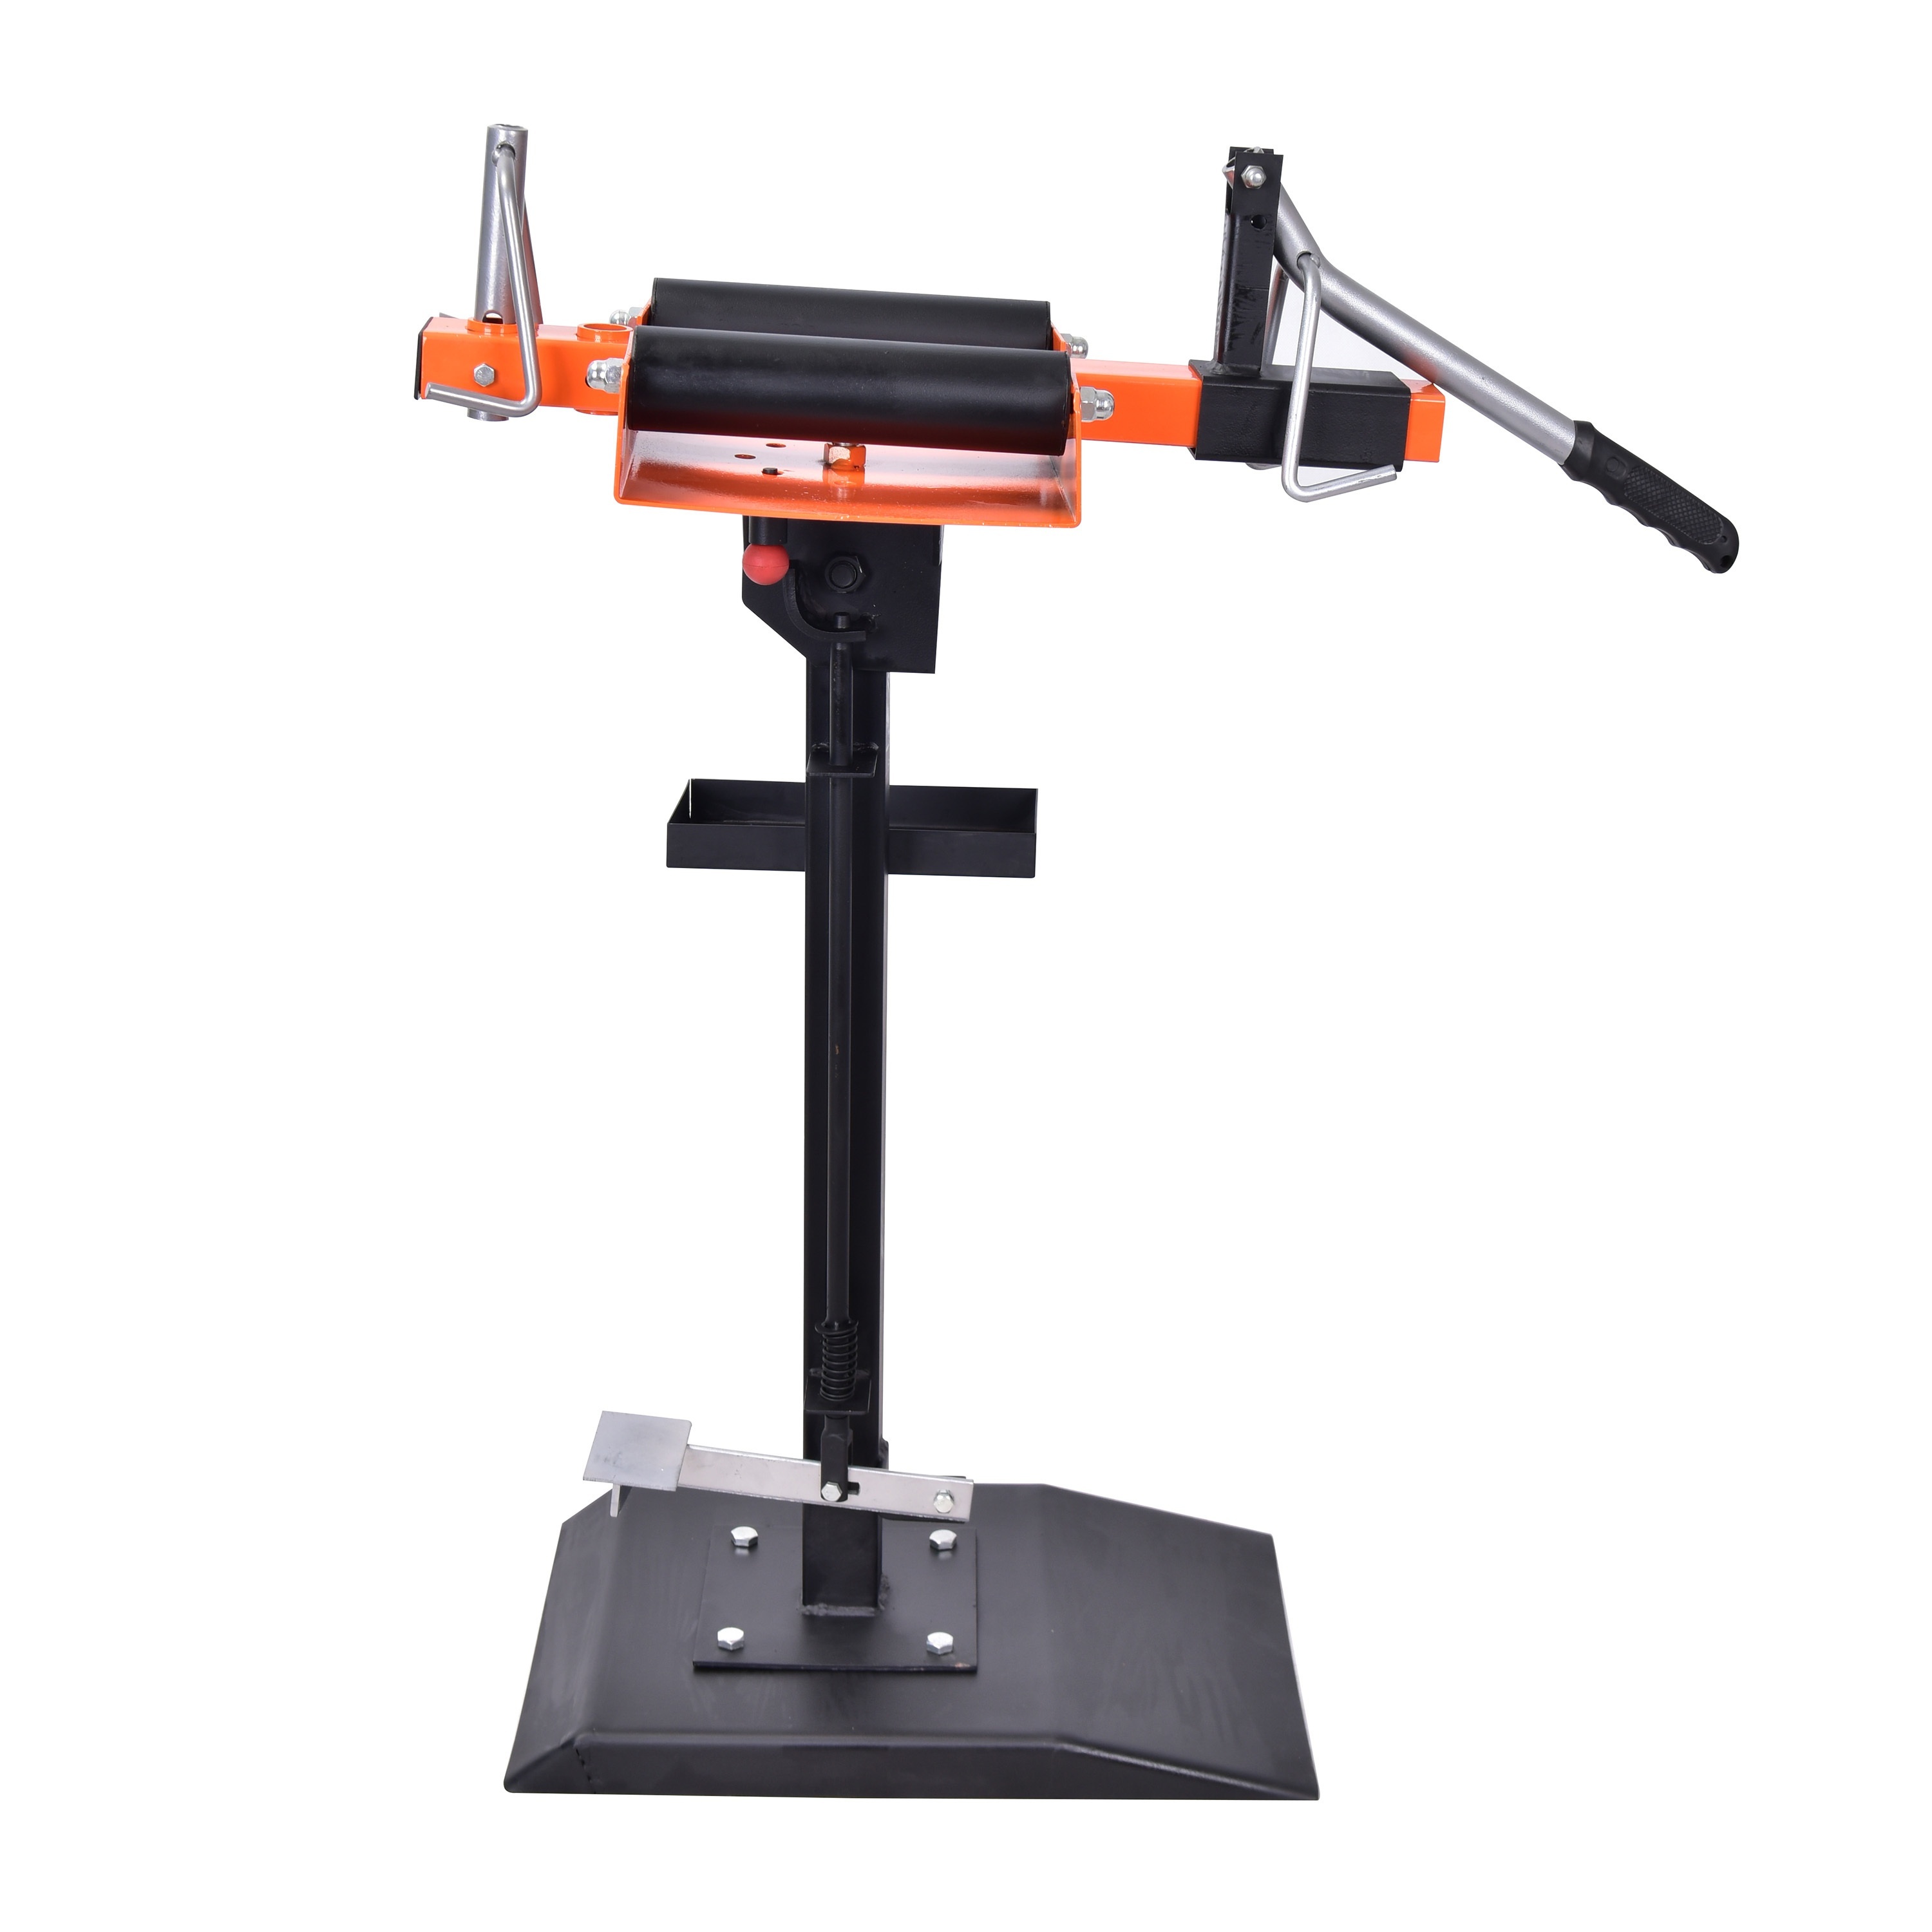 

Aain Manual Tire Spreader, Motorcycle Tire Changer With Attached Tool Tray, Tilting Swivel